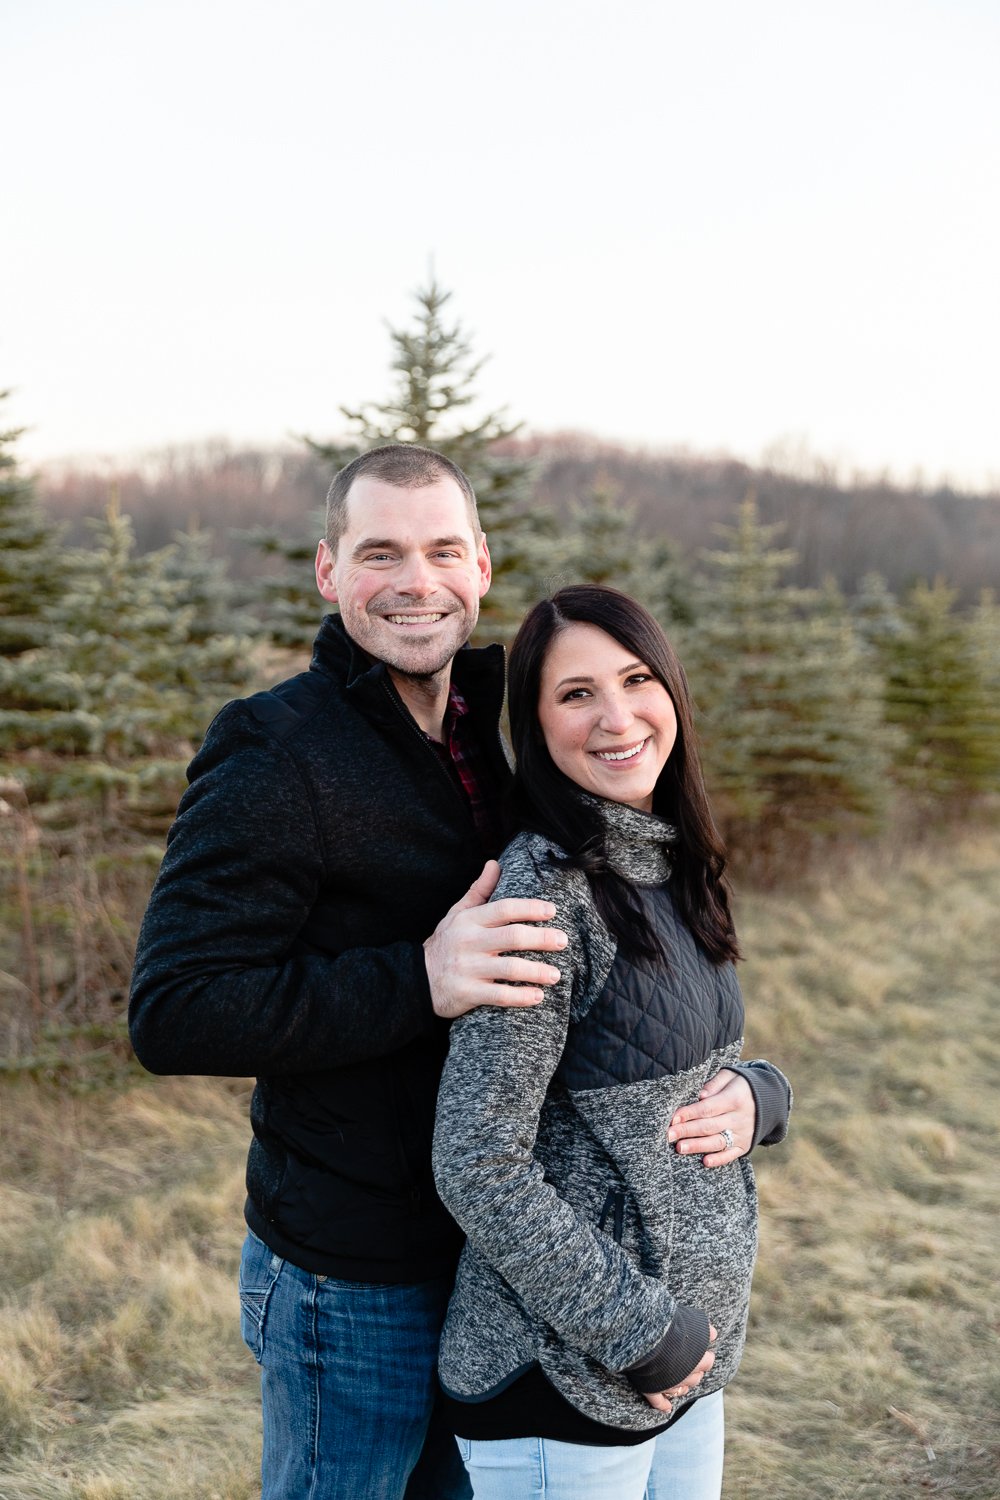 maternity photo for winter holiday cards